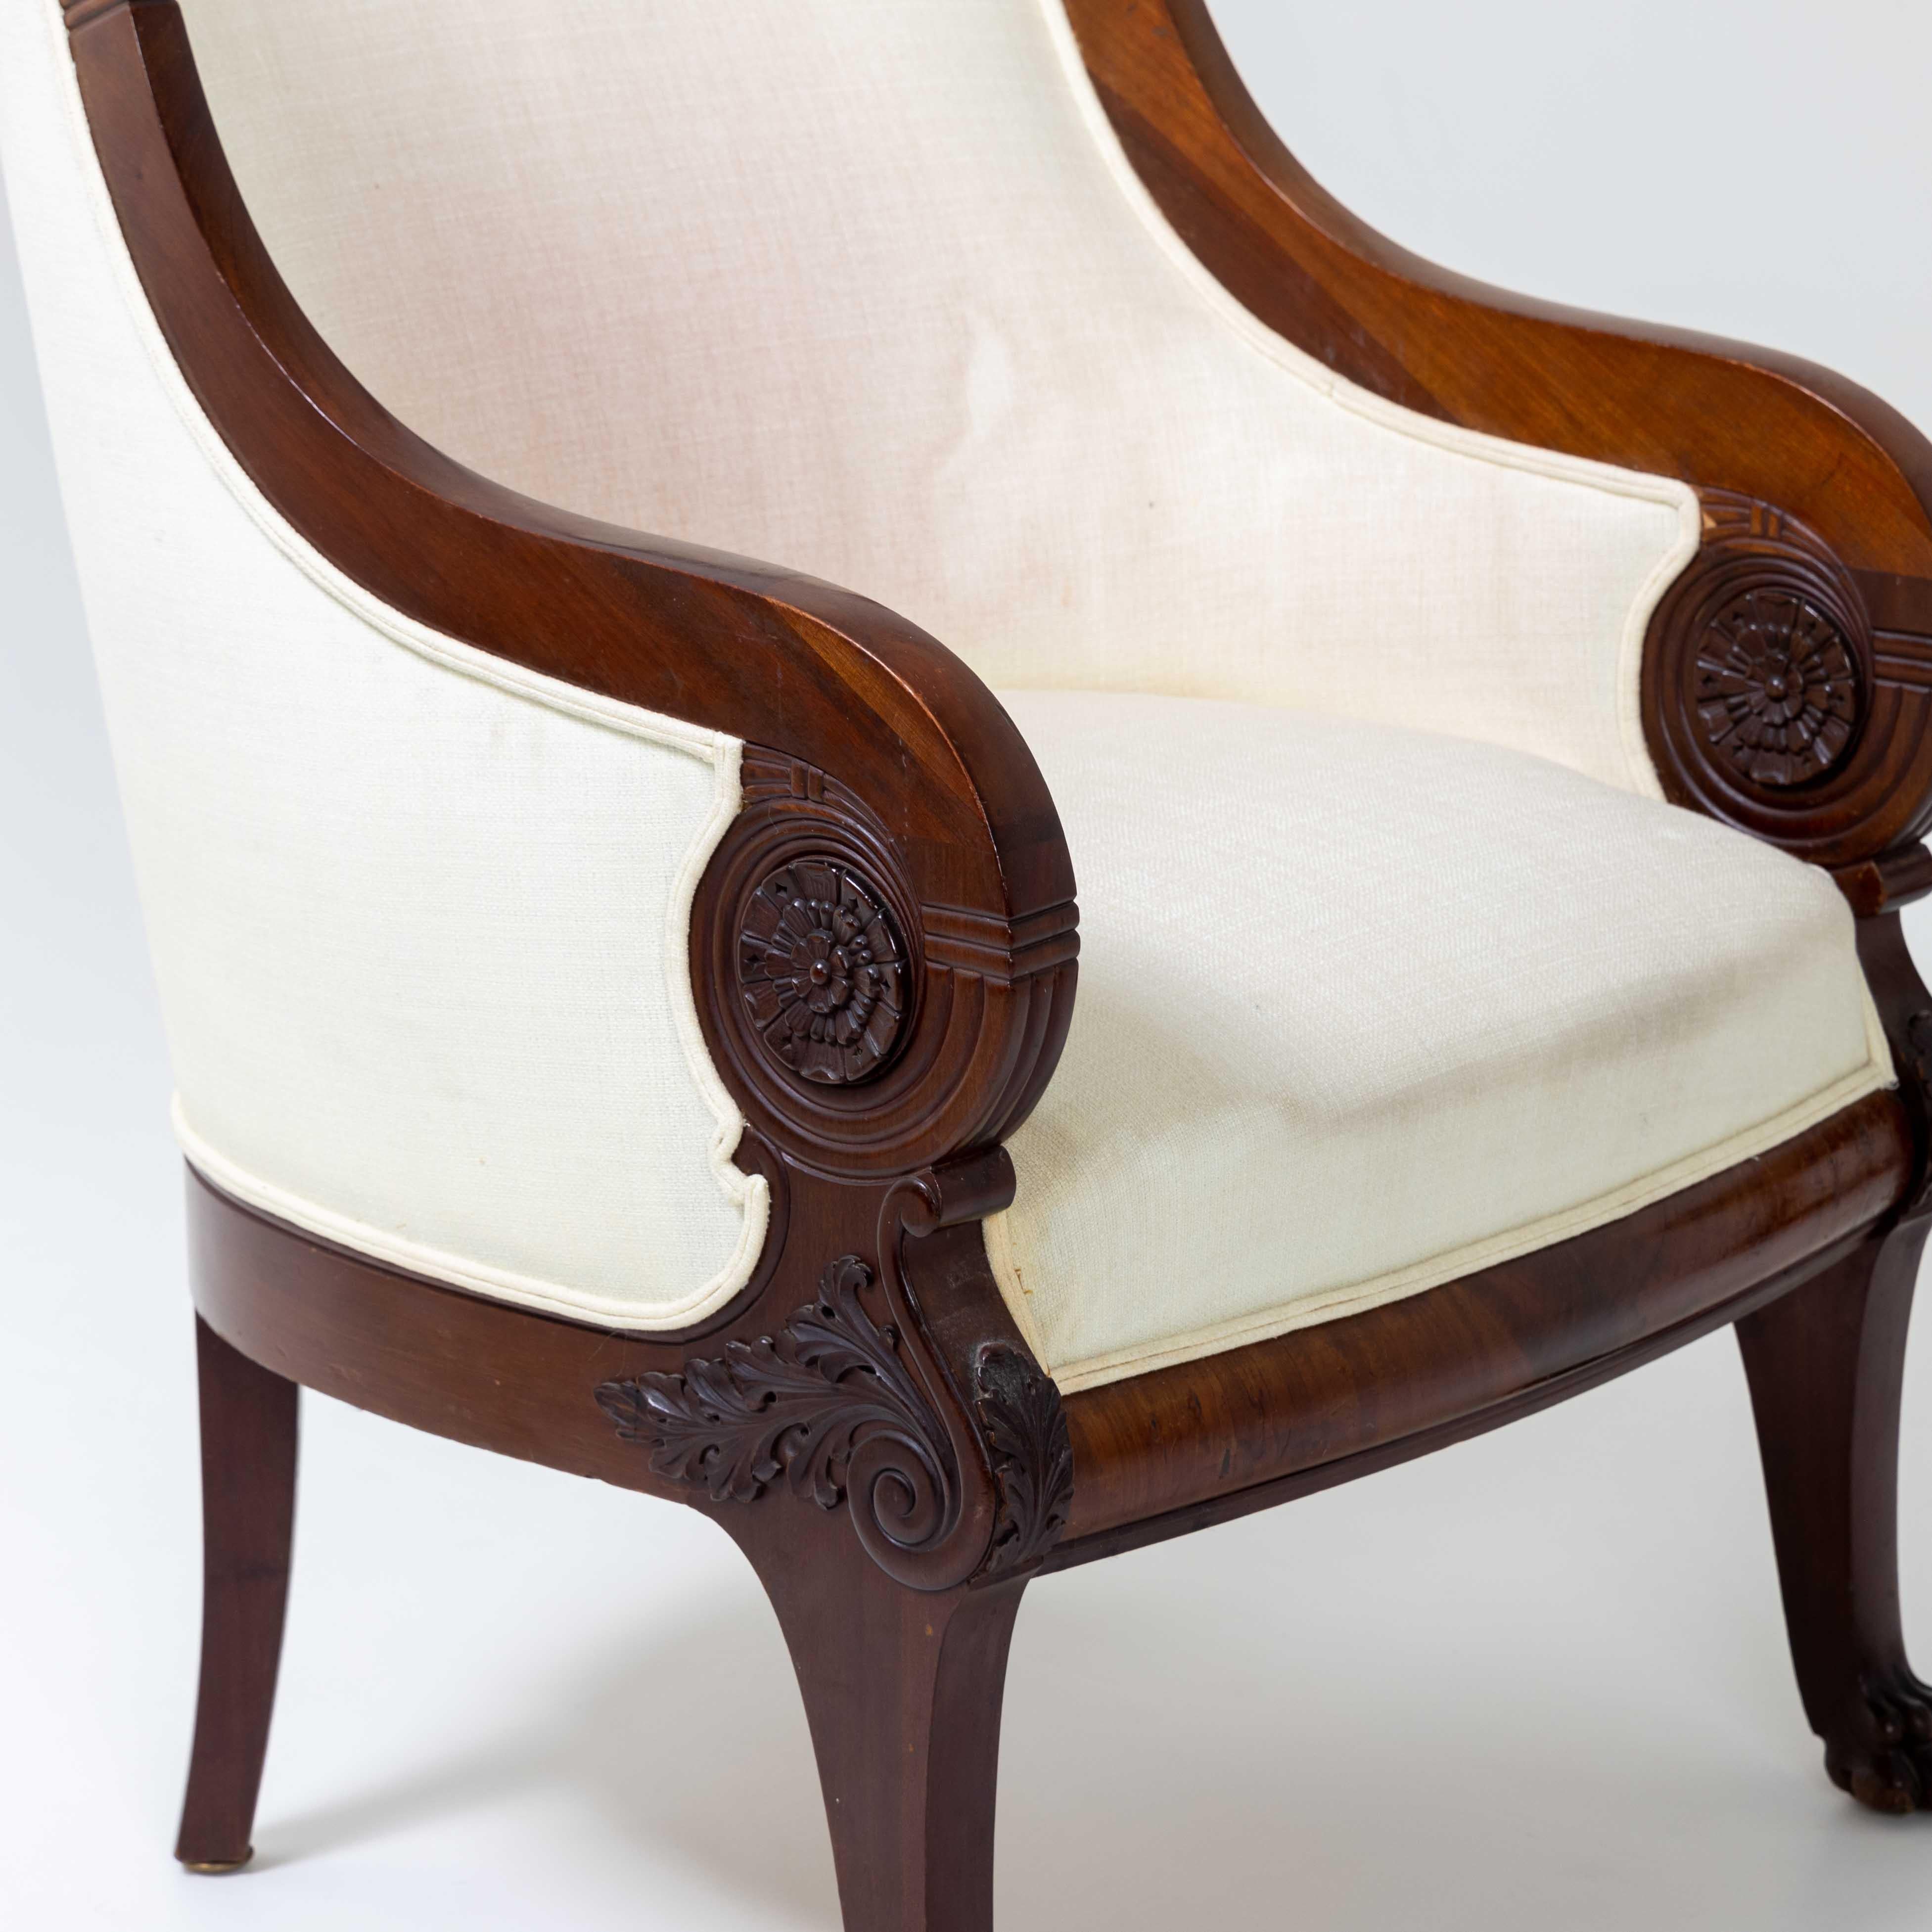 Bergère on lion paws with carved leaf decorations on the armrests and high elegantly curved backrest. The armchair was completely polished by hand and newly upholstered with a creamy white fabric.